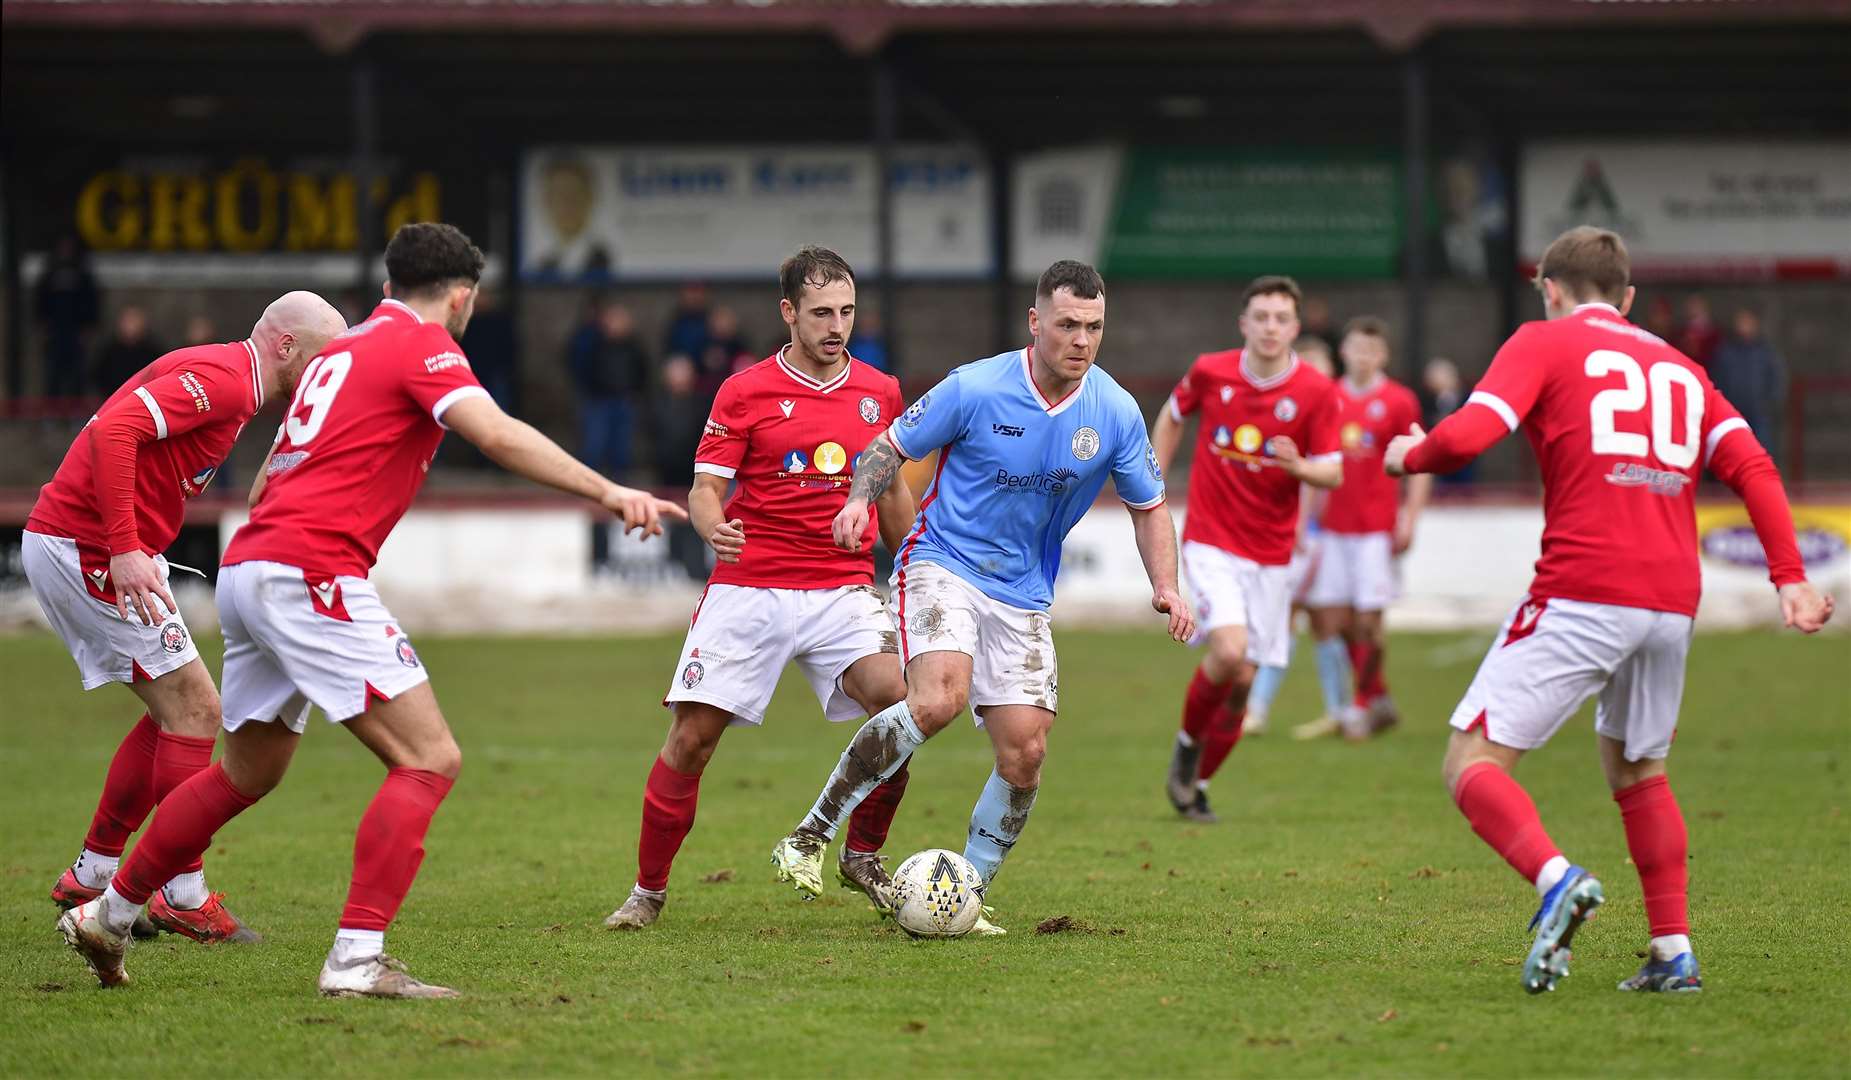 If you want it, come and get it: Gordon MacNab finds himself surrounded by Brechin City players. Picture: Mel Roger